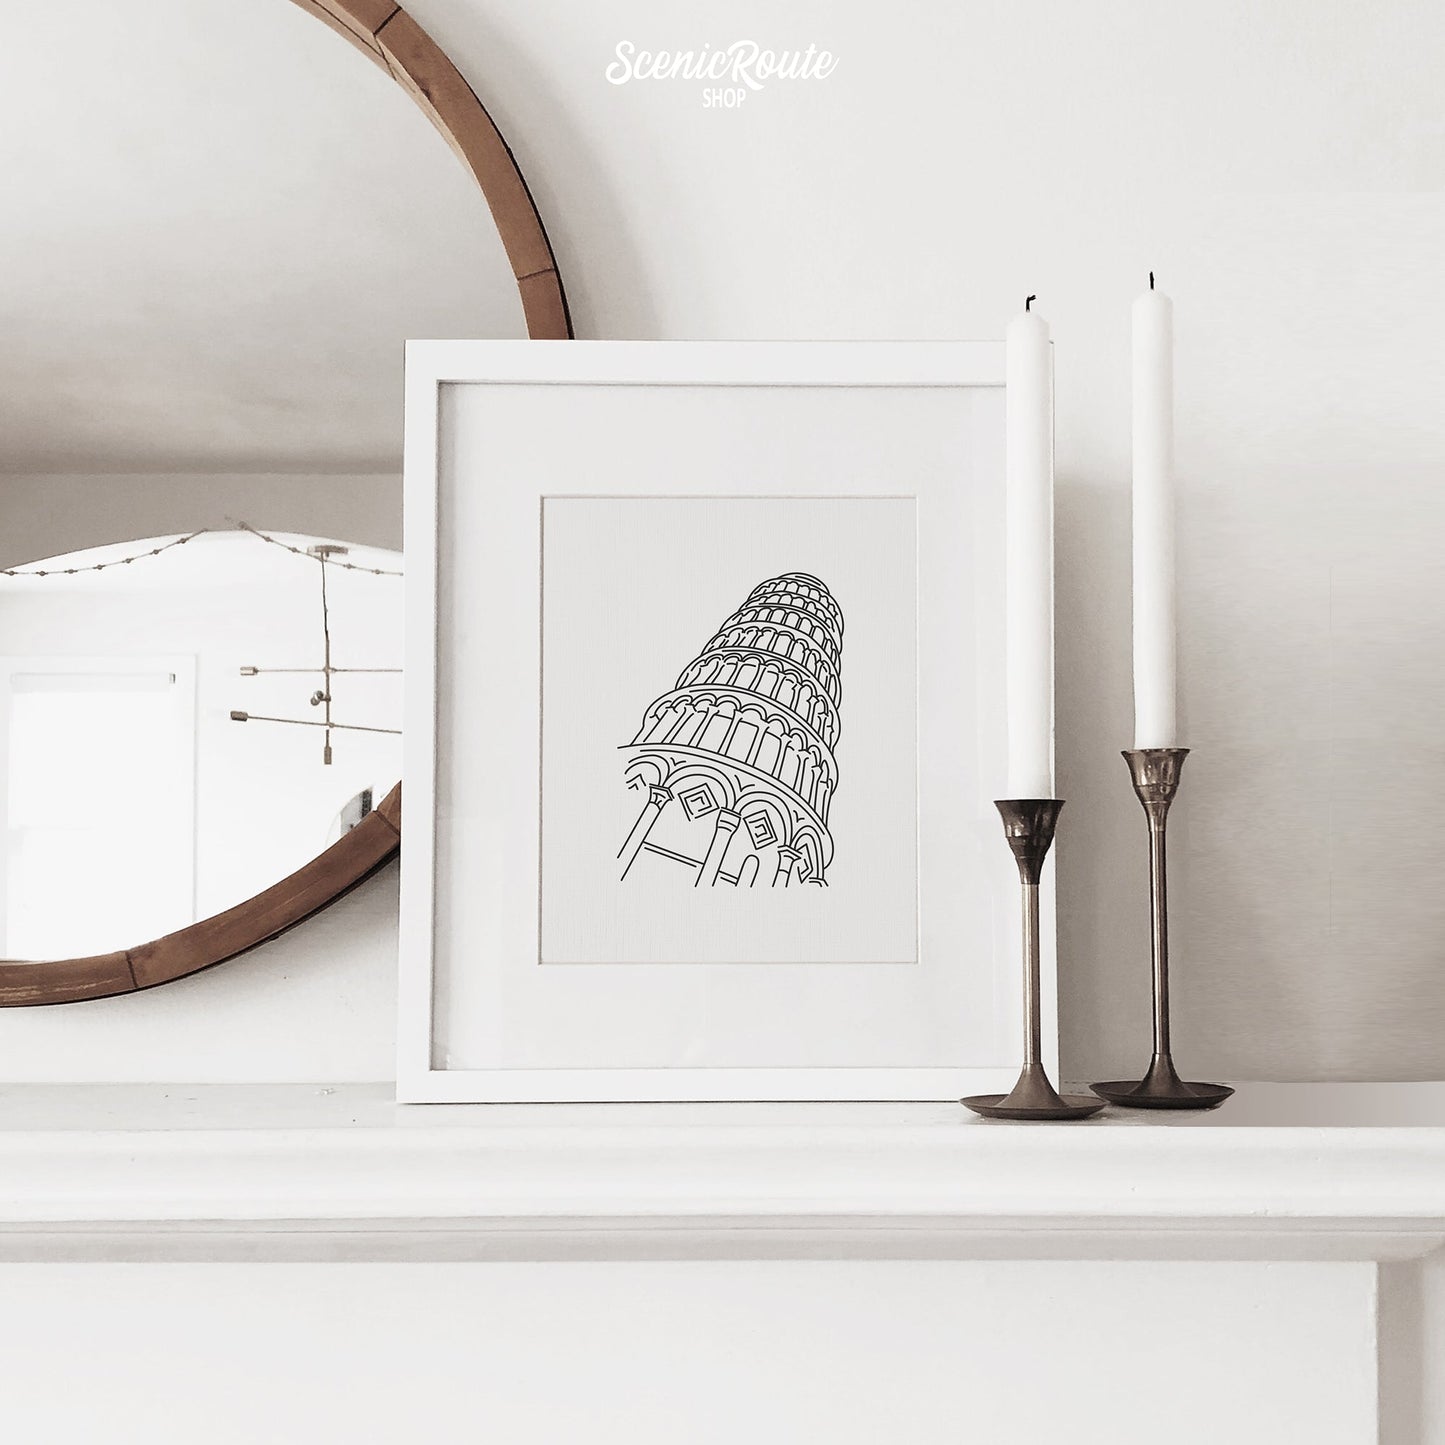 A framed line art drawing of the Leaning Tower of Pisa on a fireplace mantle with candles and a mirror